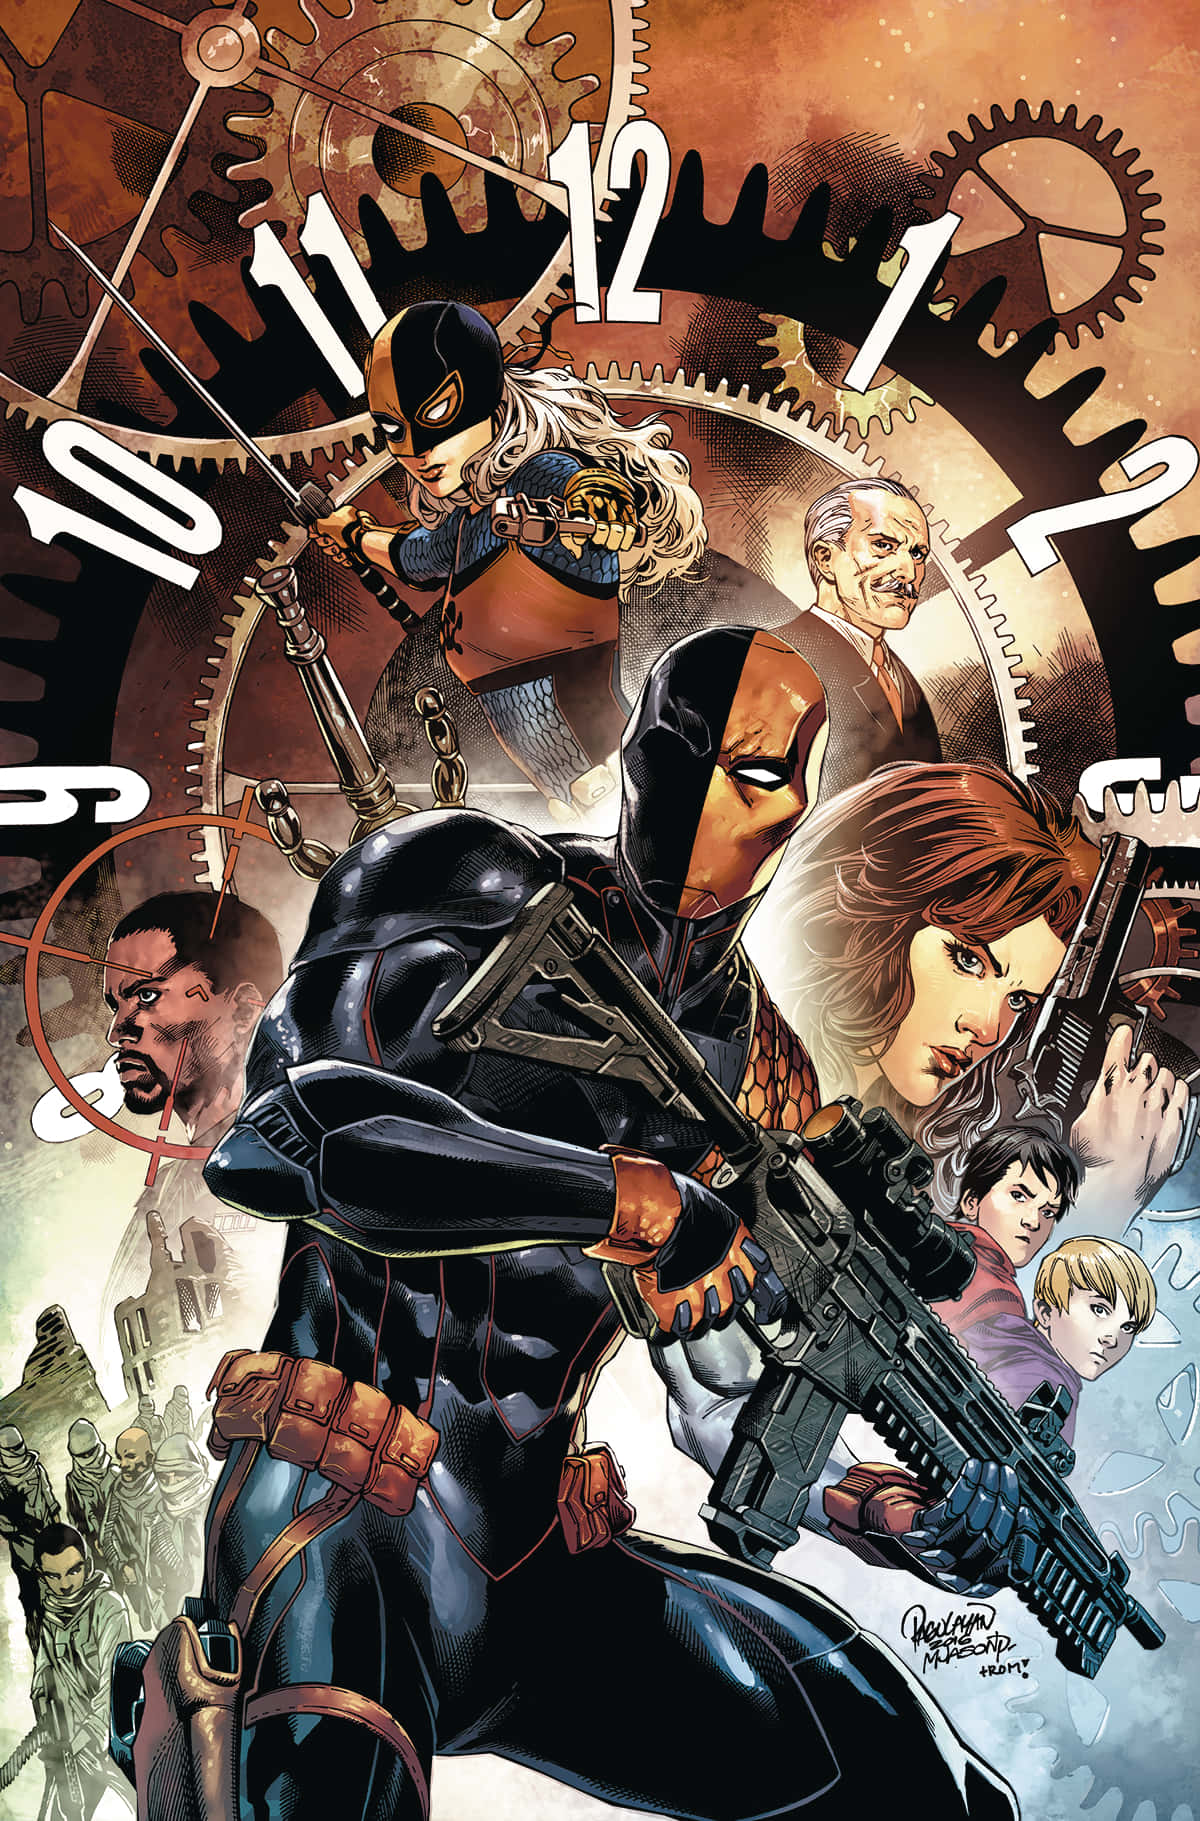 Witness the Unstoppable Force of DC Comics' Legendary Assassin: Deathstroke!